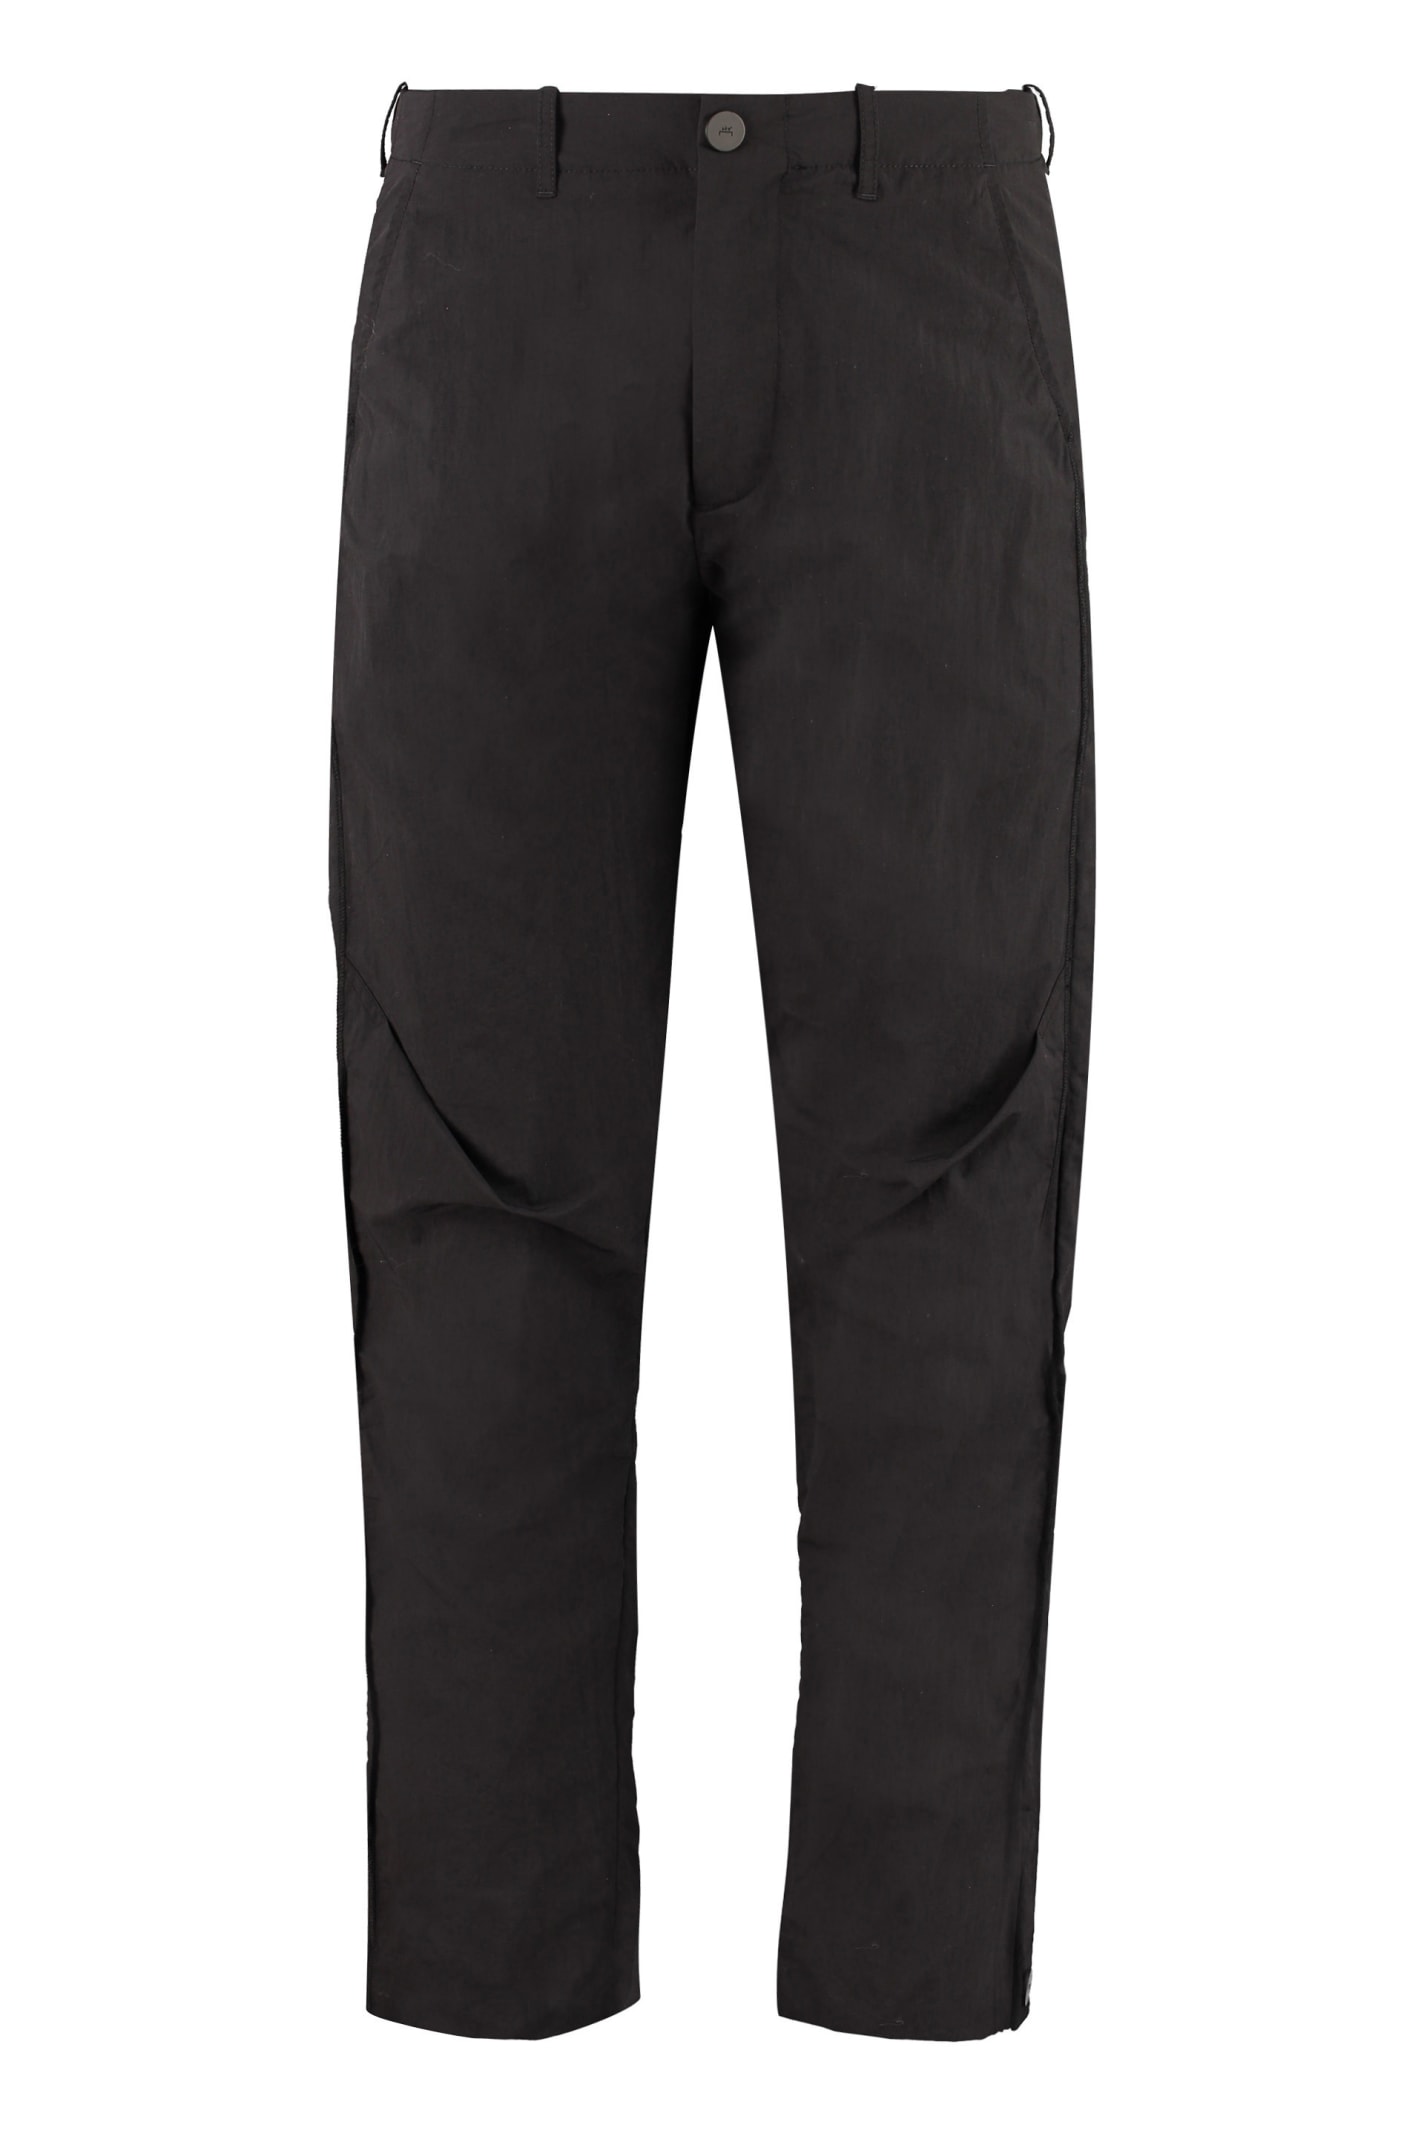 A-COLD-WALL Technical Fabric Pants